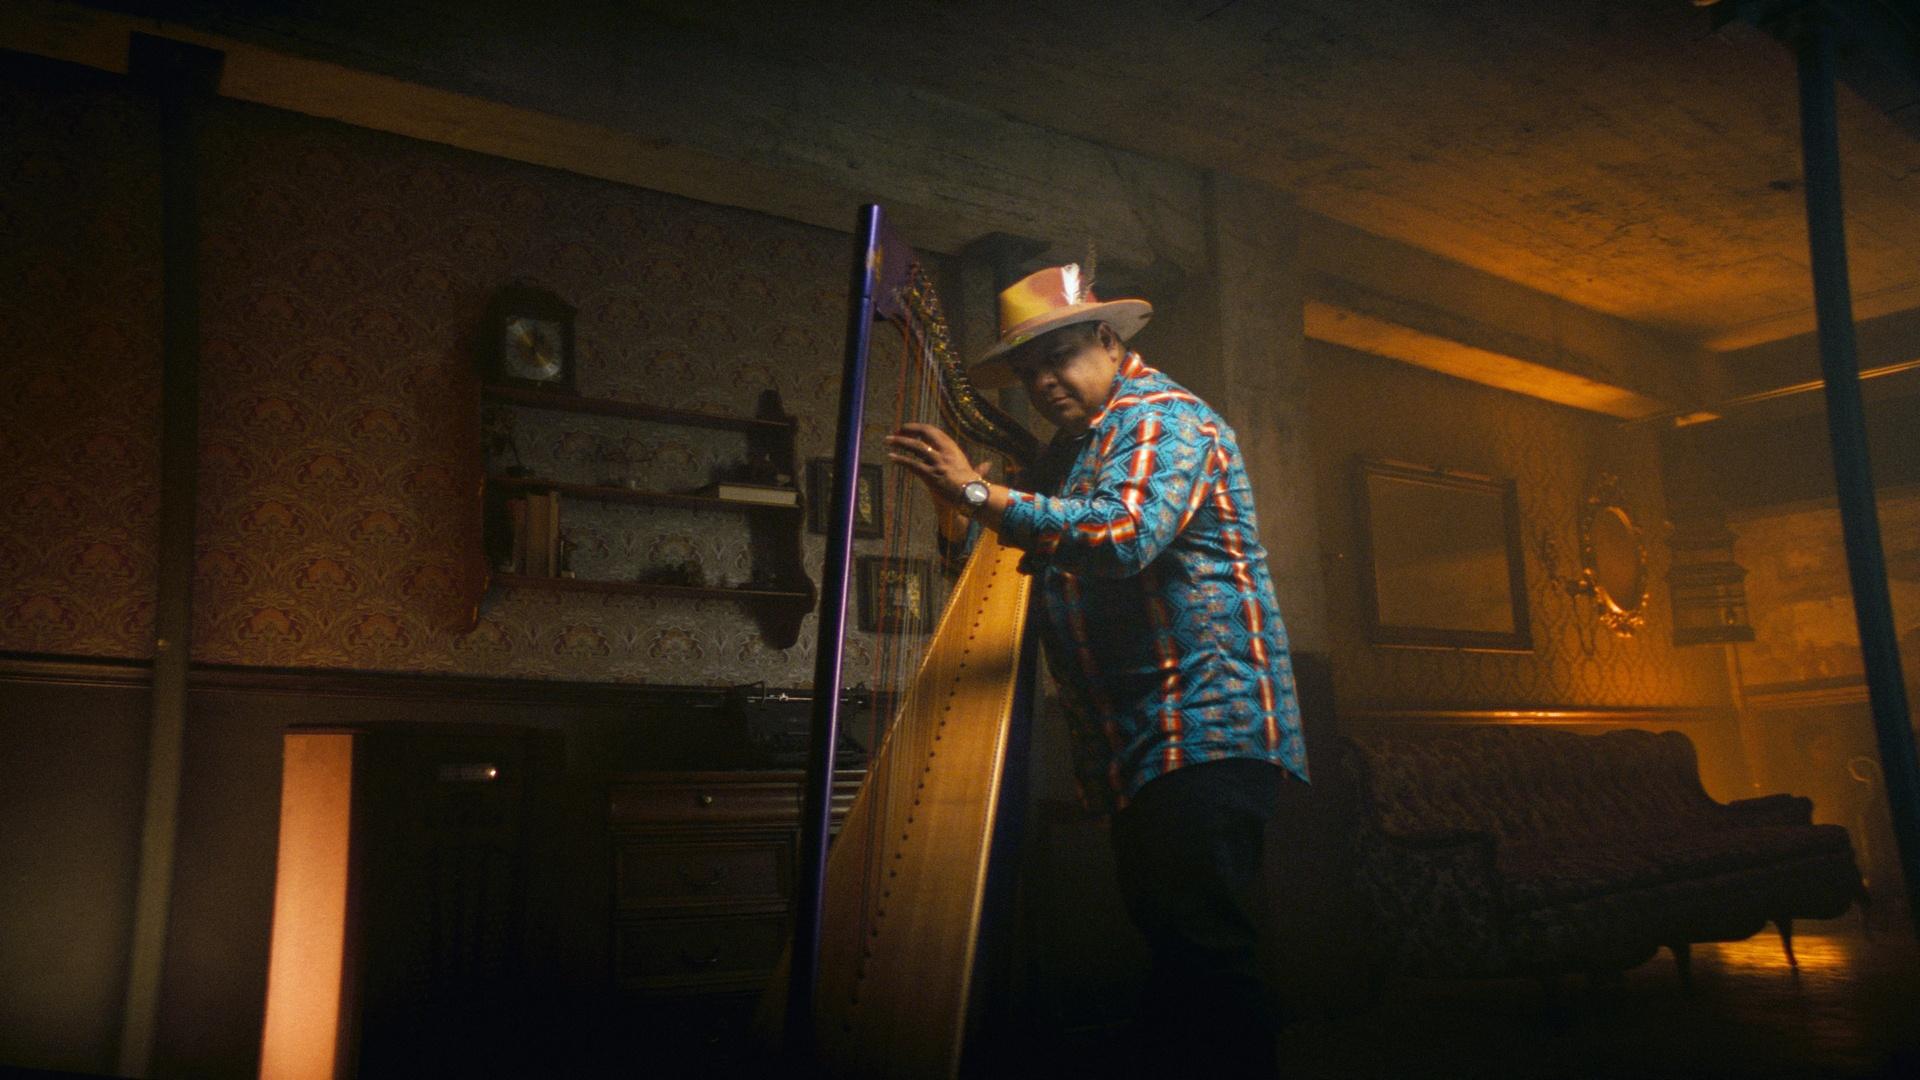 A man in a hat plays the harp.